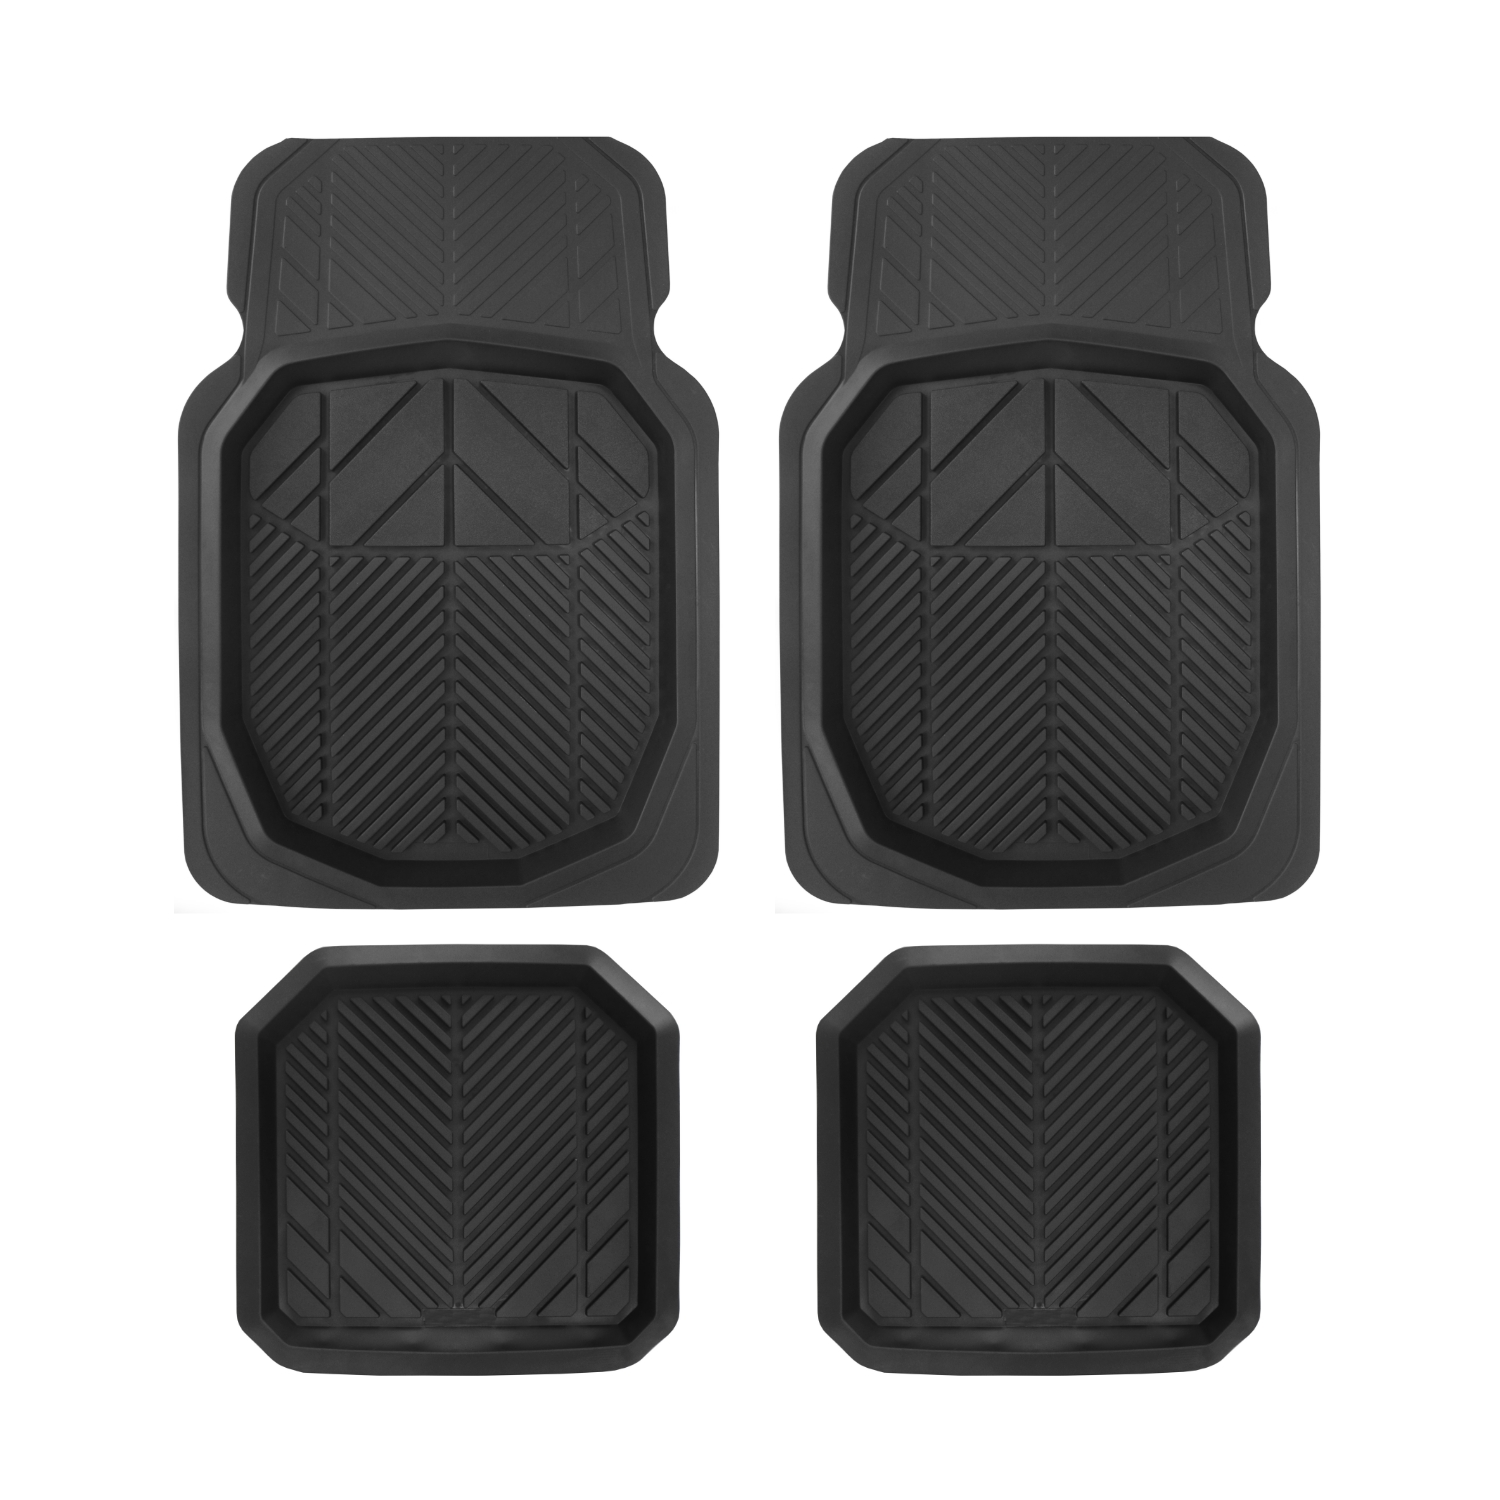 Buy Best Pvc Mat For Car Exporter –  Universal basics 3-Piece All-Weather Protection Heavy Duty Rubber Floor Mats for Cars, SUVs, and Trucks 1884 – Litai